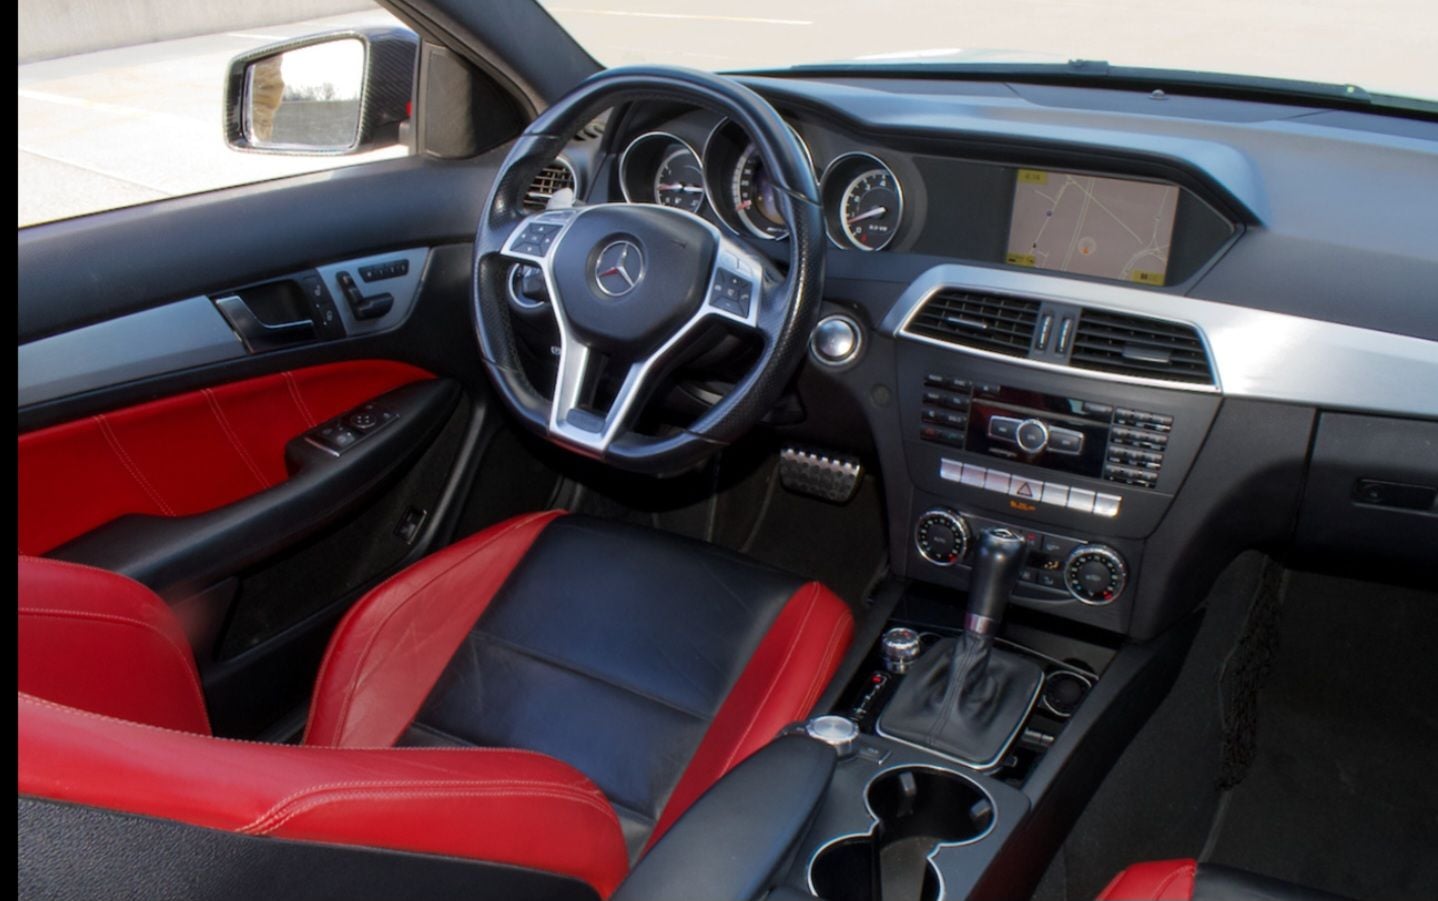 Interior/Upholstery - W204 c63 coupe designo interior seats amg 2012 - Used - 2012 to 2014 Mercedes-Benz C63 AMG - Long Beach, CA 90803, United States